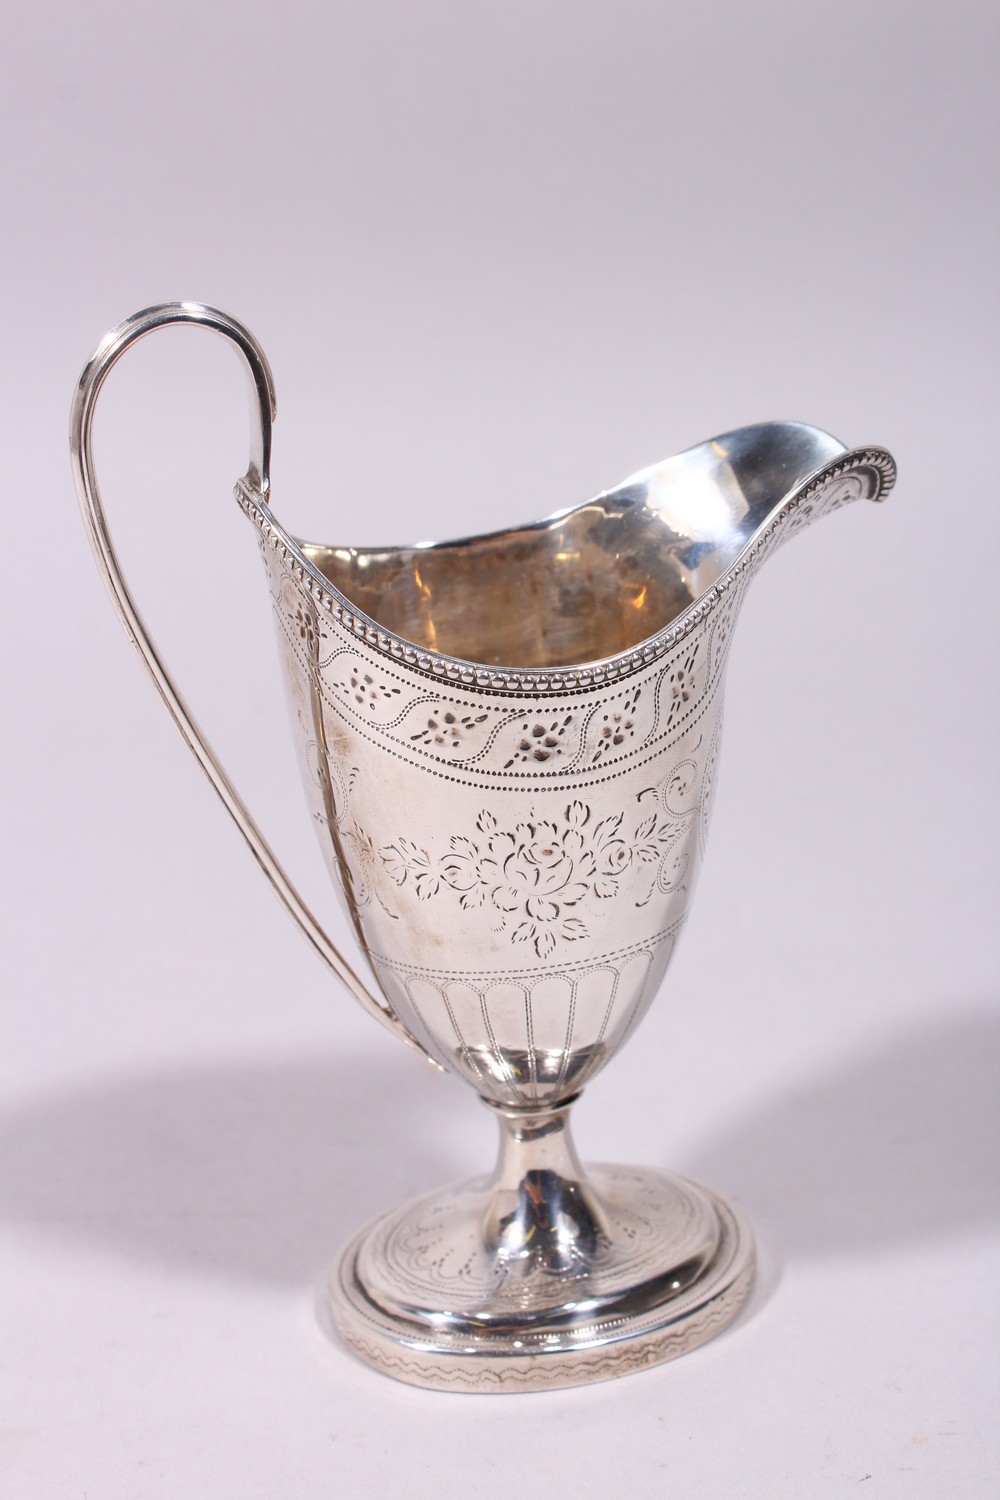 A GOOD GEORGE III ENGRAVED HELMET SHAPED MILK JUG, with reeded handle and base. London 1782. - Image 6 of 9